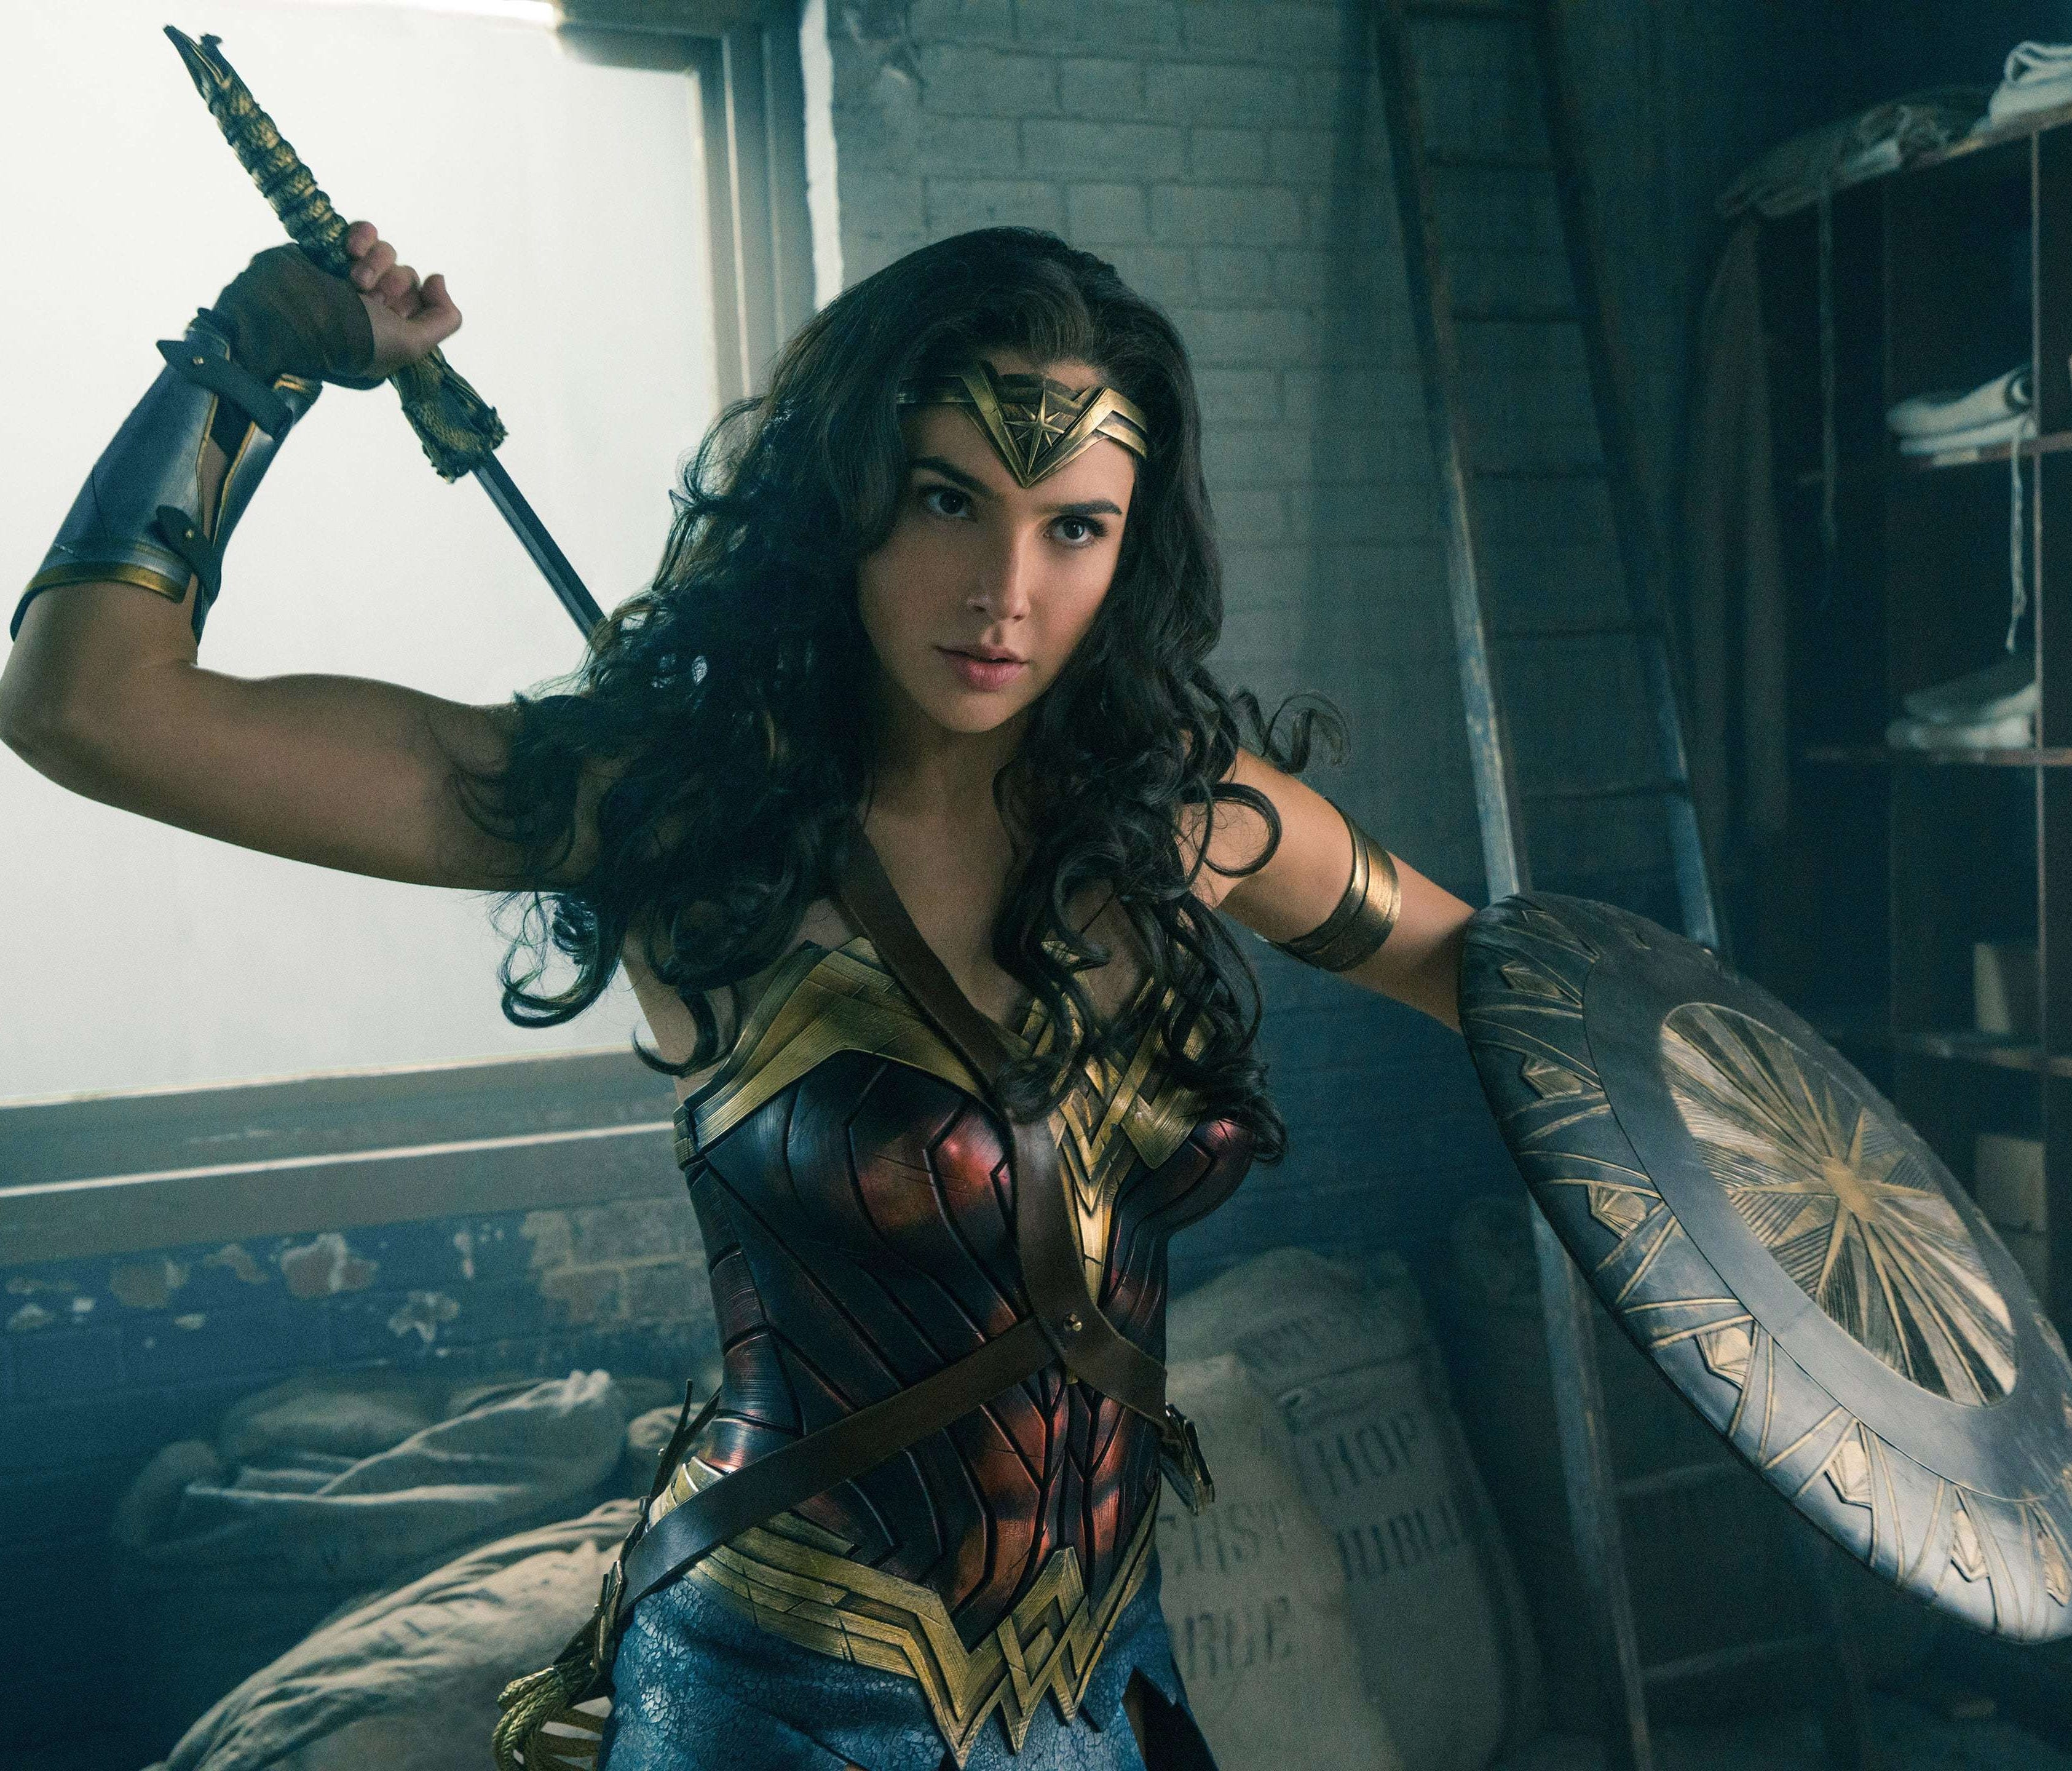 Gal Gadot shows off 'Wonder Woman's powers and weapons in a battle sequence midway through the movie that will leave audiences breathless.